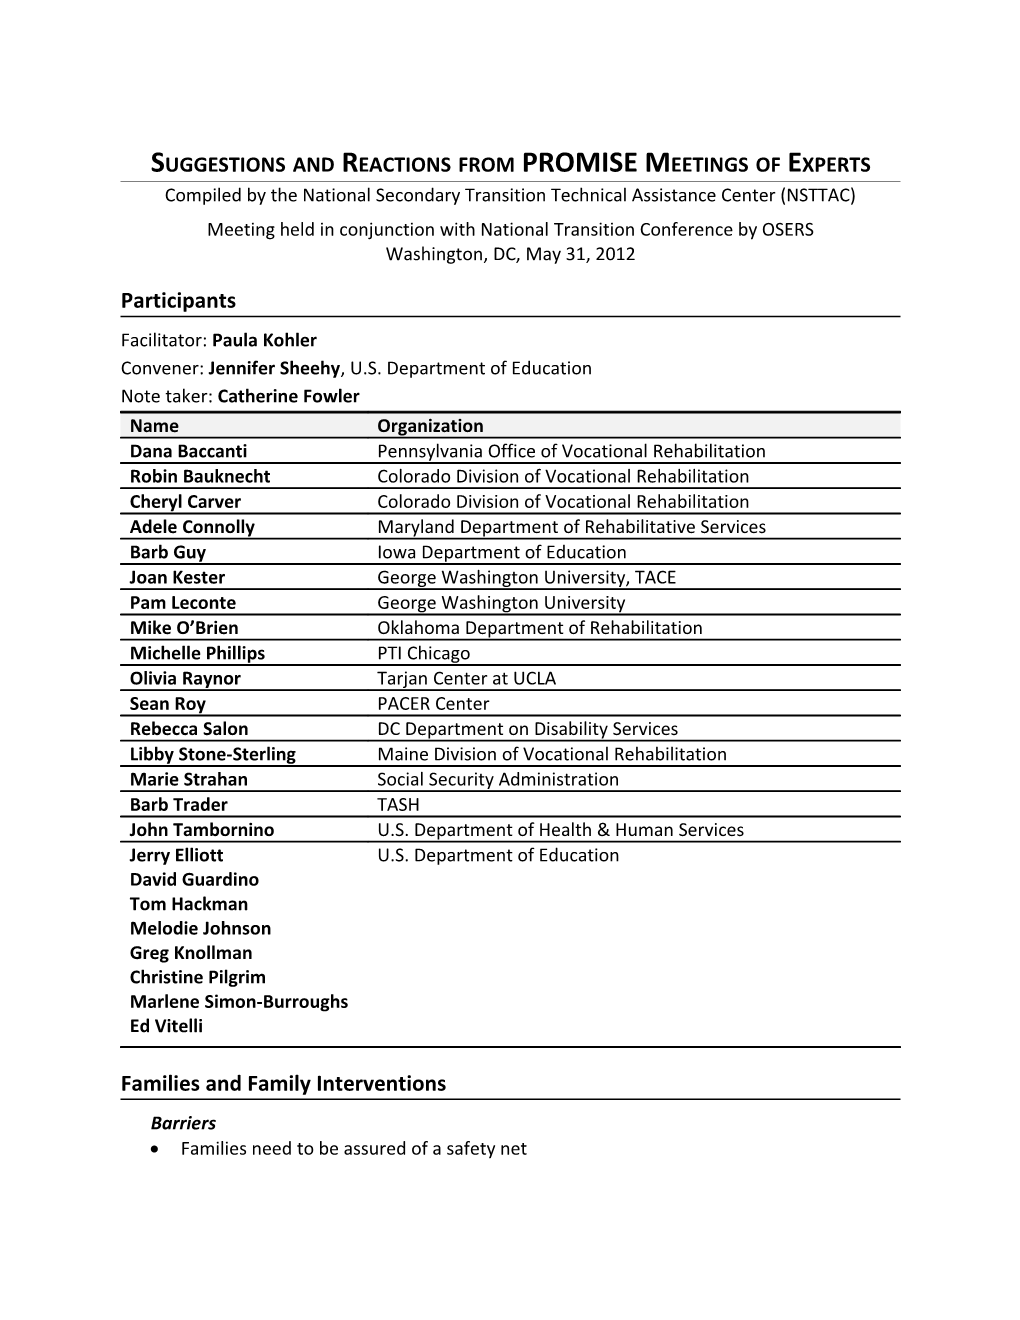 Suggestions and Reactions from PROMISE Meetings of Experts. (MS Word)